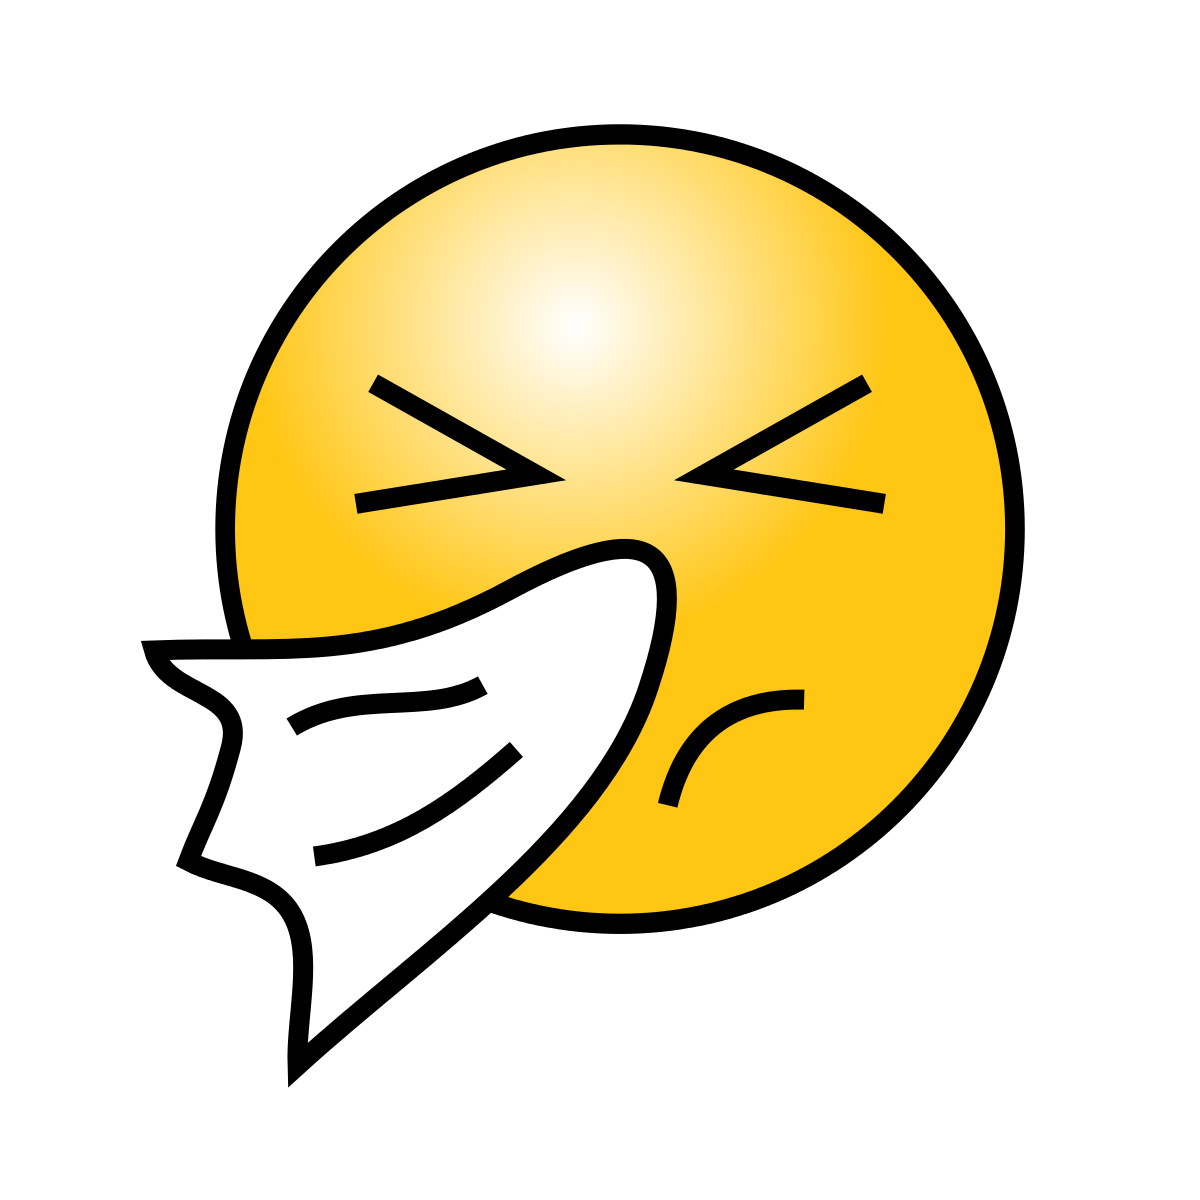 Smiley Face With A Cold, Sneezing Into Handkerchief Clipart by ...